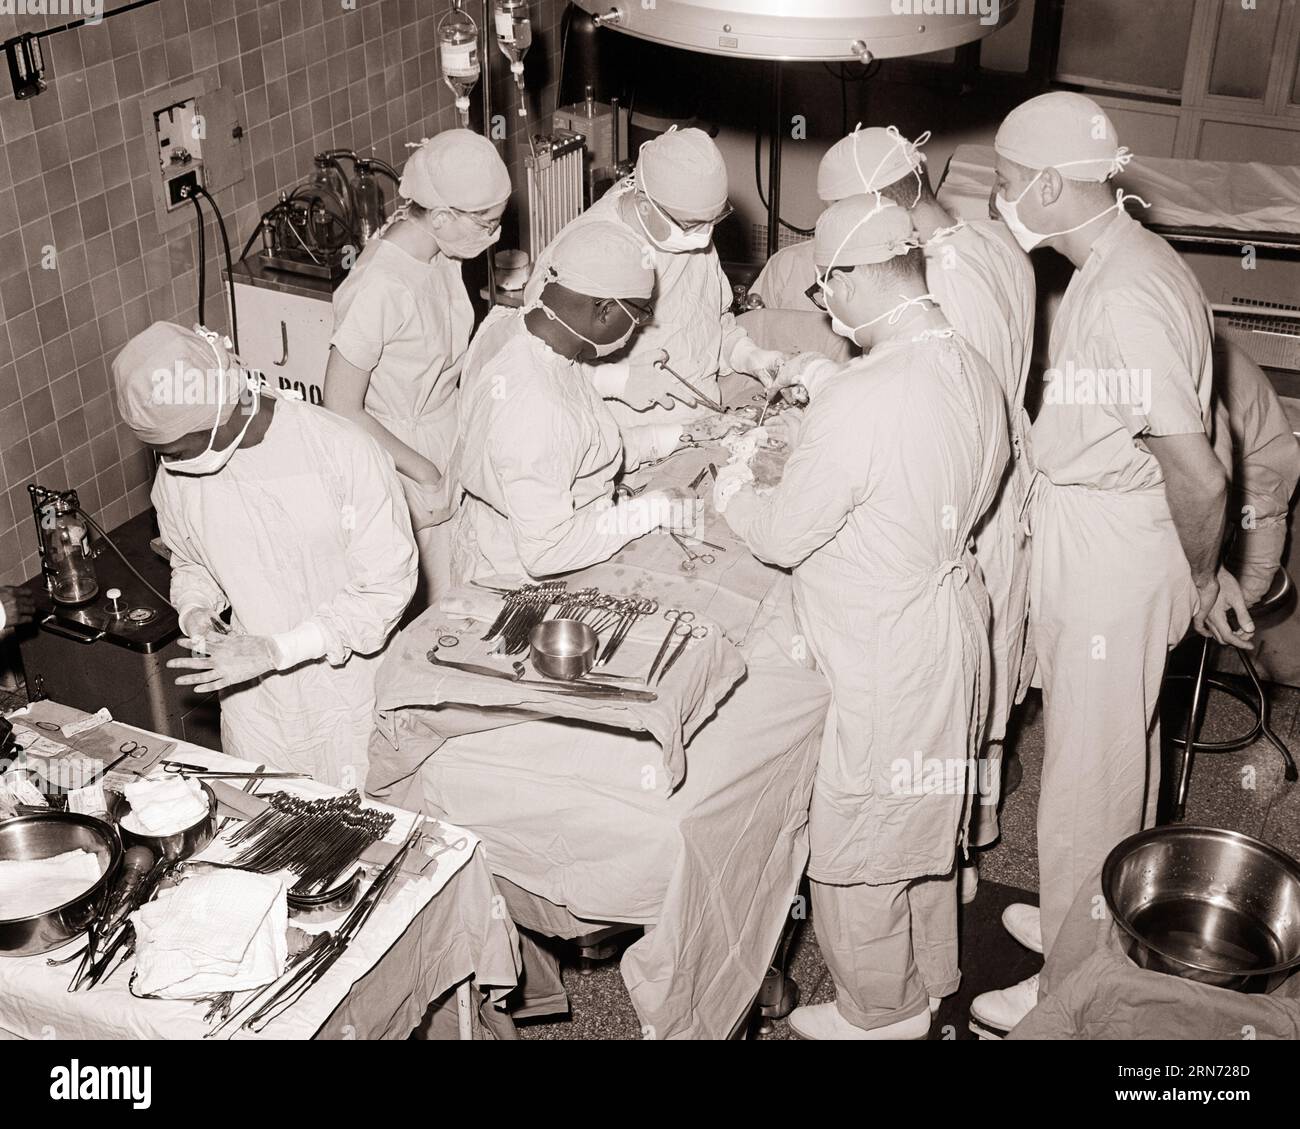 1960s 1970s DOCTORS SURGEONS NURSES STERILE GOWNS CAPS MASKS PERFORMING SURGERY IN OPERATING ROOM OF HOSPITAL - m8451 HAR001 HARS RISK CONFIDENCE B&W HEALTHCARE PERFORMING SURGERY WIDE ANGLE OPERATING PREVENTION HEAD AND SHOULDERS HIGH ANGLE STERILE STRENGTH HEALING AFRICAN-AMERICANS AFRICAN-AMERICAN DIAGNOSIS SURGICAL KNOWLEDGE SURGEONS BLACK ETHNICITY GOWNS OPERATING ROOM HEALTH CARE AUTHORITY IMPAIRMENT OCCUPATIONS SURGEON TREATMENT CONCEPTUAL CAPS HOSPITALS OPERATION STYLISH FACILITY FACILITIES OR COOPERATION BLACK AND WHITE CAUCASIAN ETHNICITY DISEASE HAR001 OLD FASHIONED Stock Photo